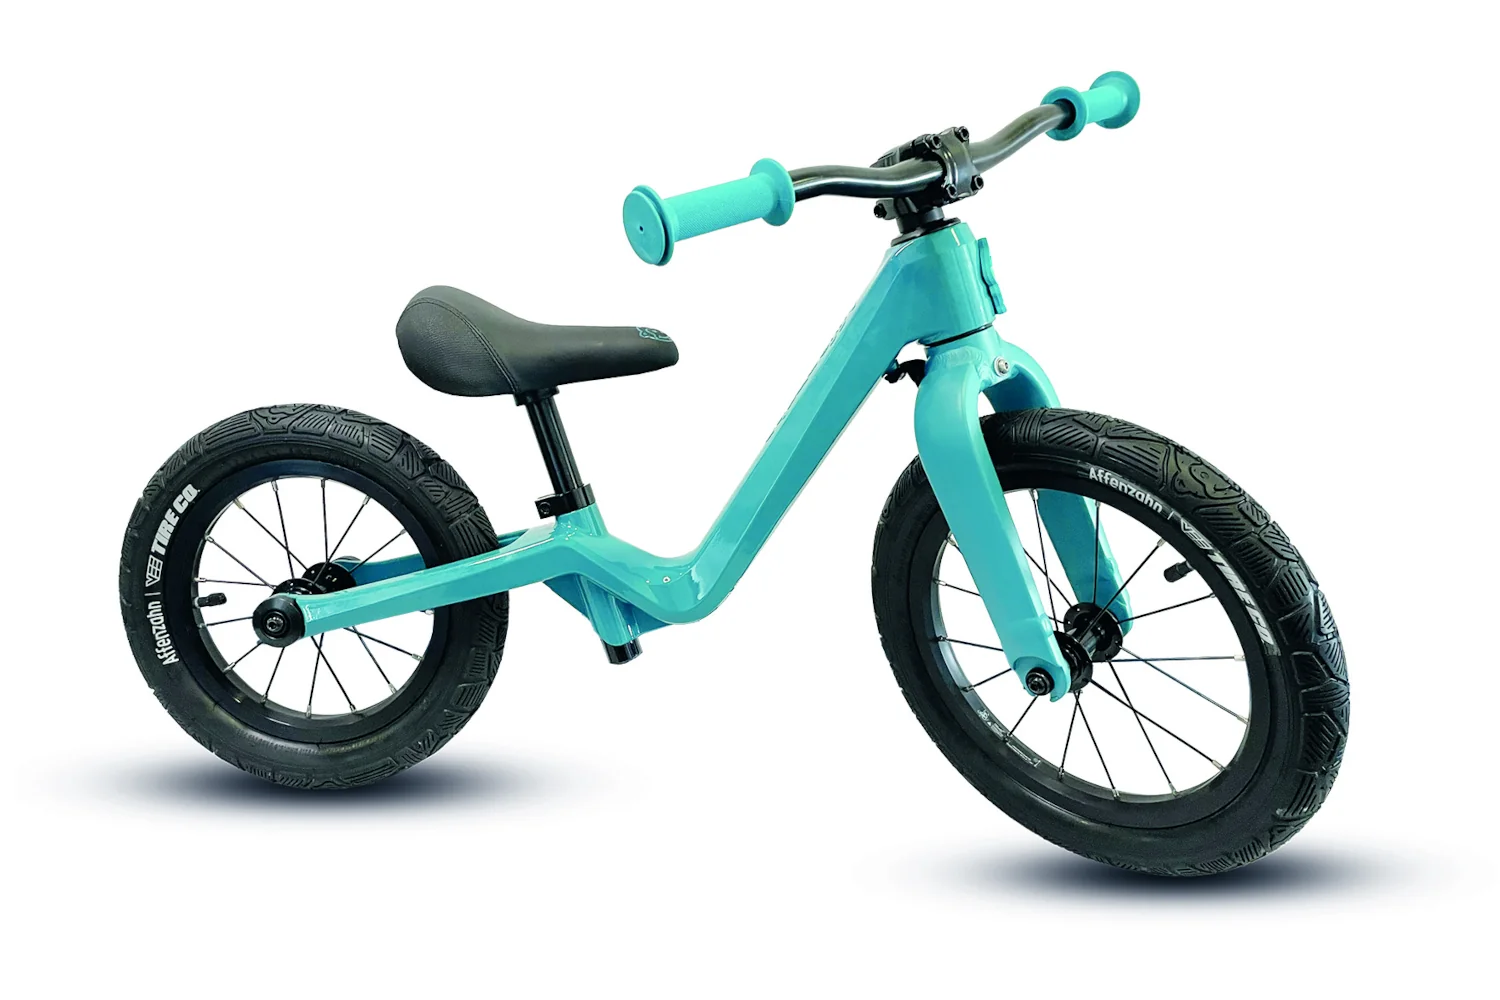 New kids balance bike from Affenzahn with frame made entirely of plastic